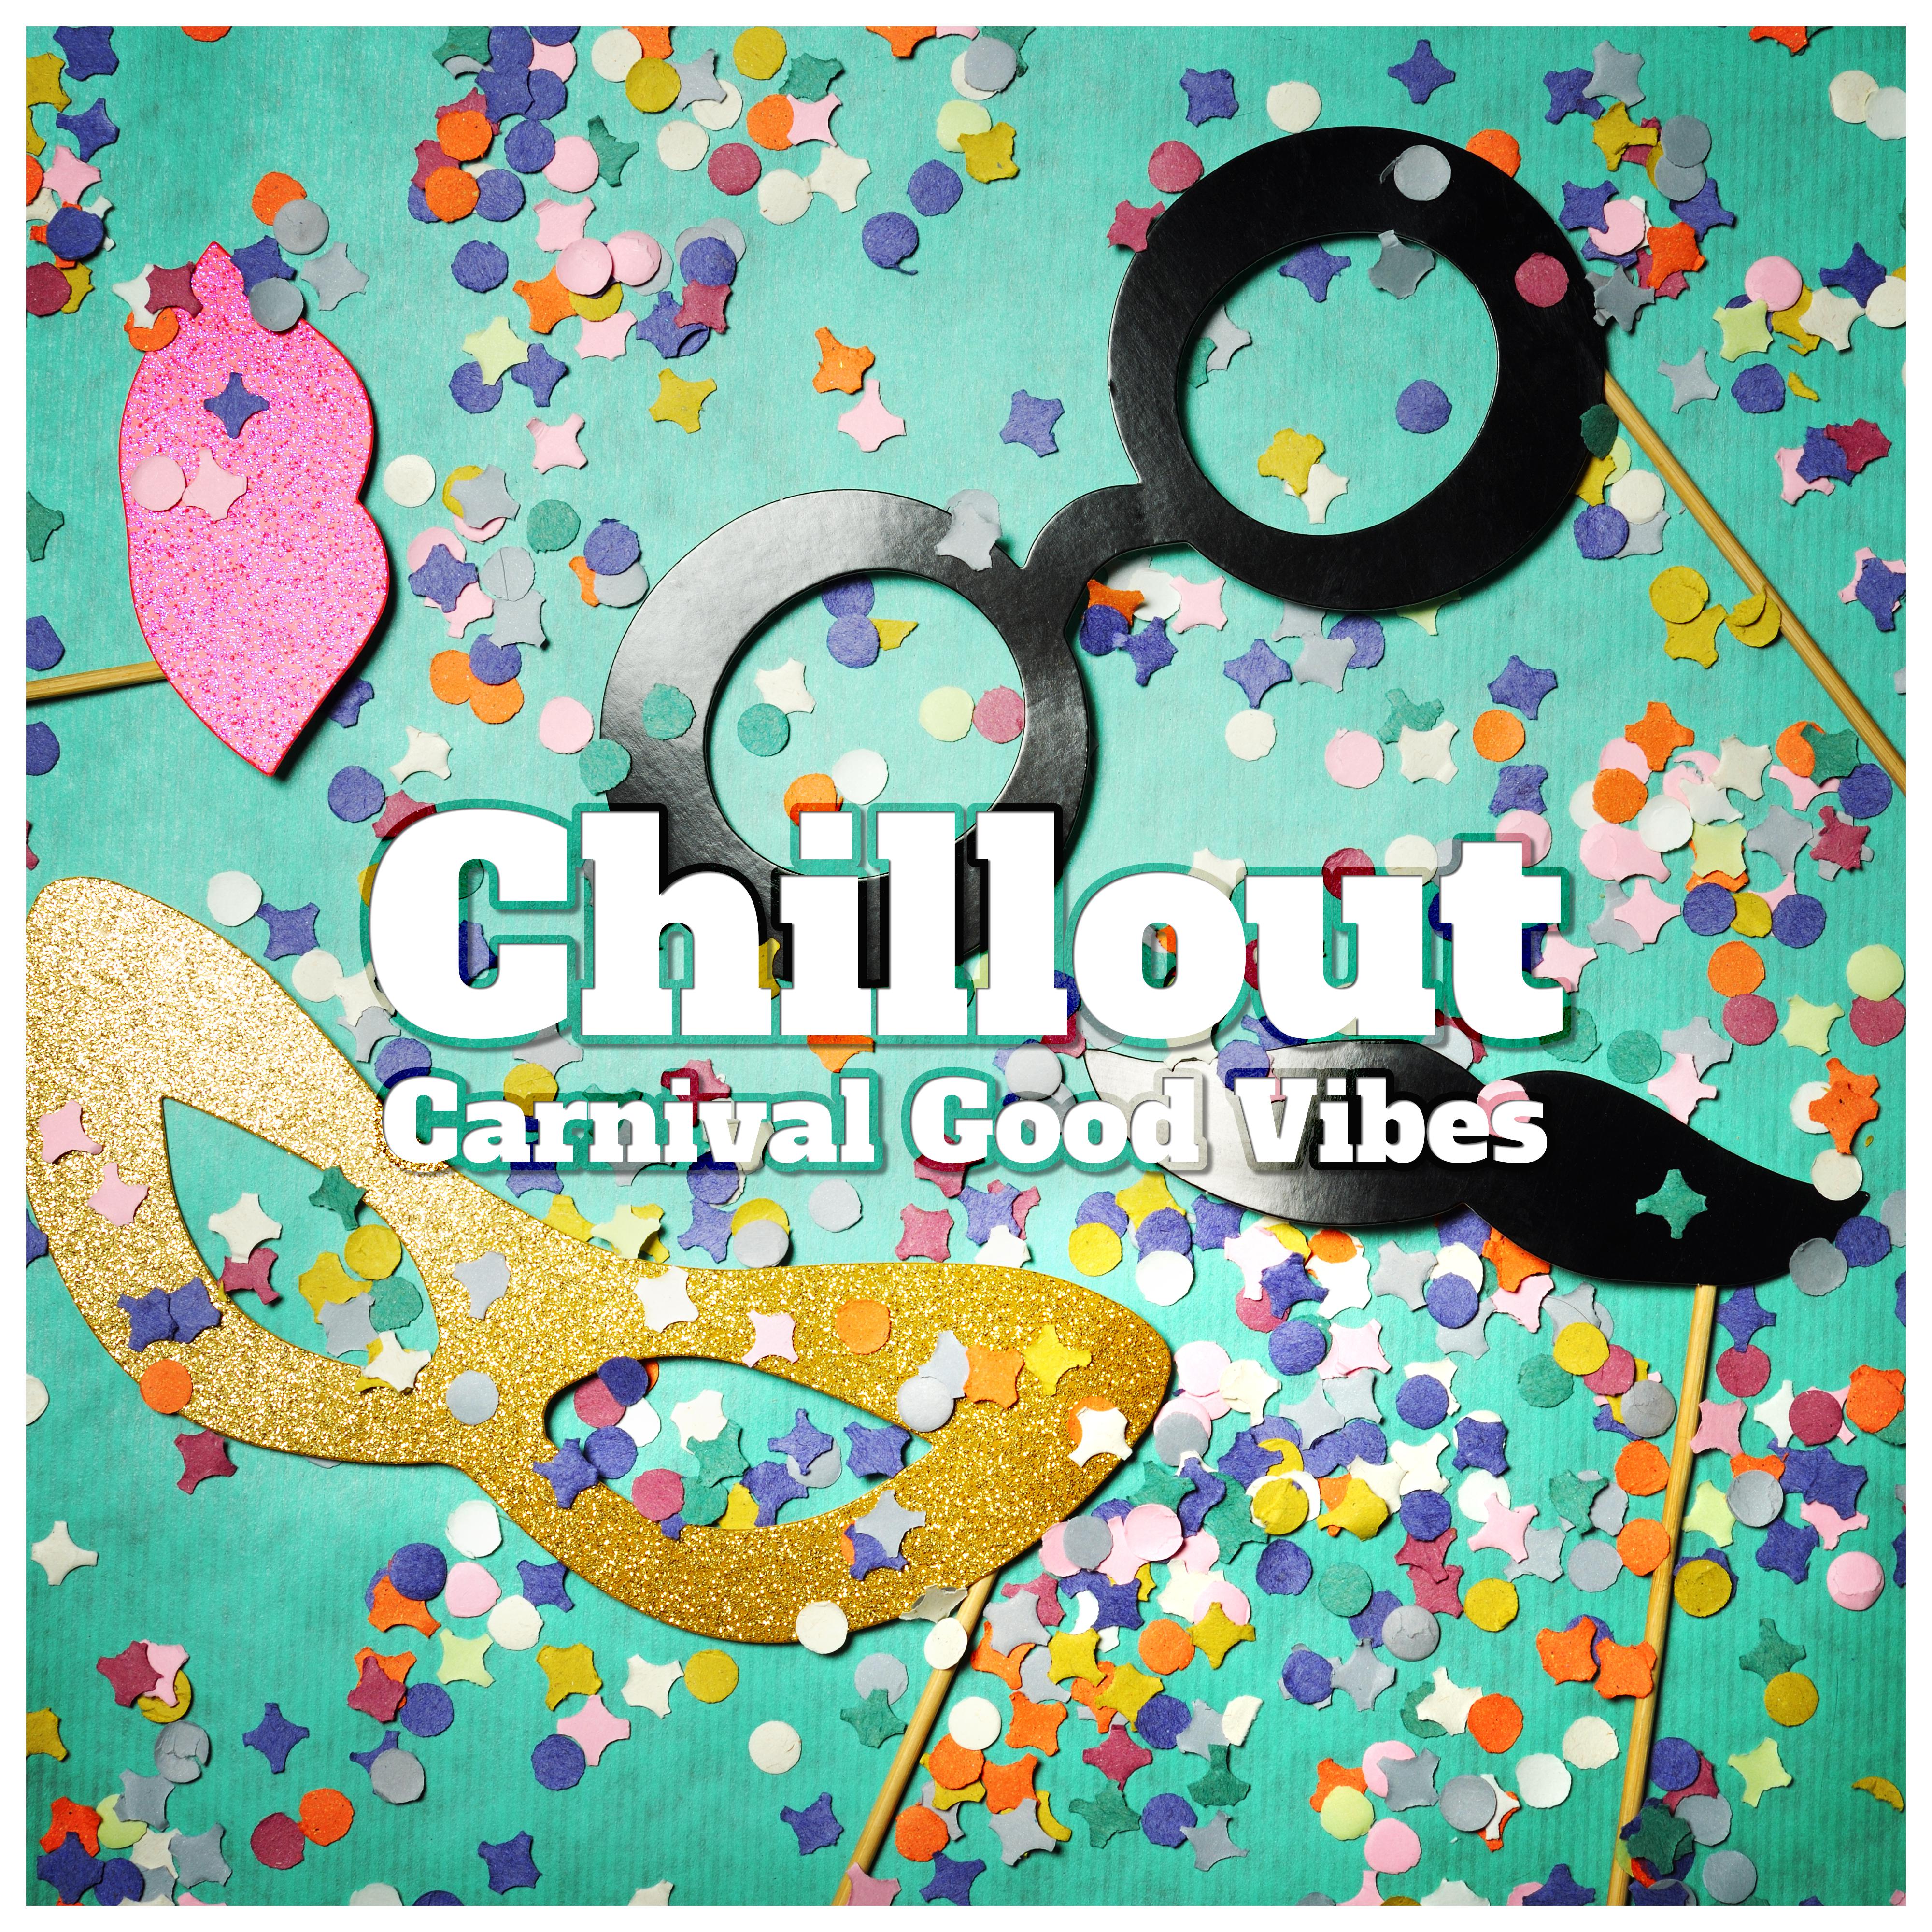 Chillout Carnival Good Vibes